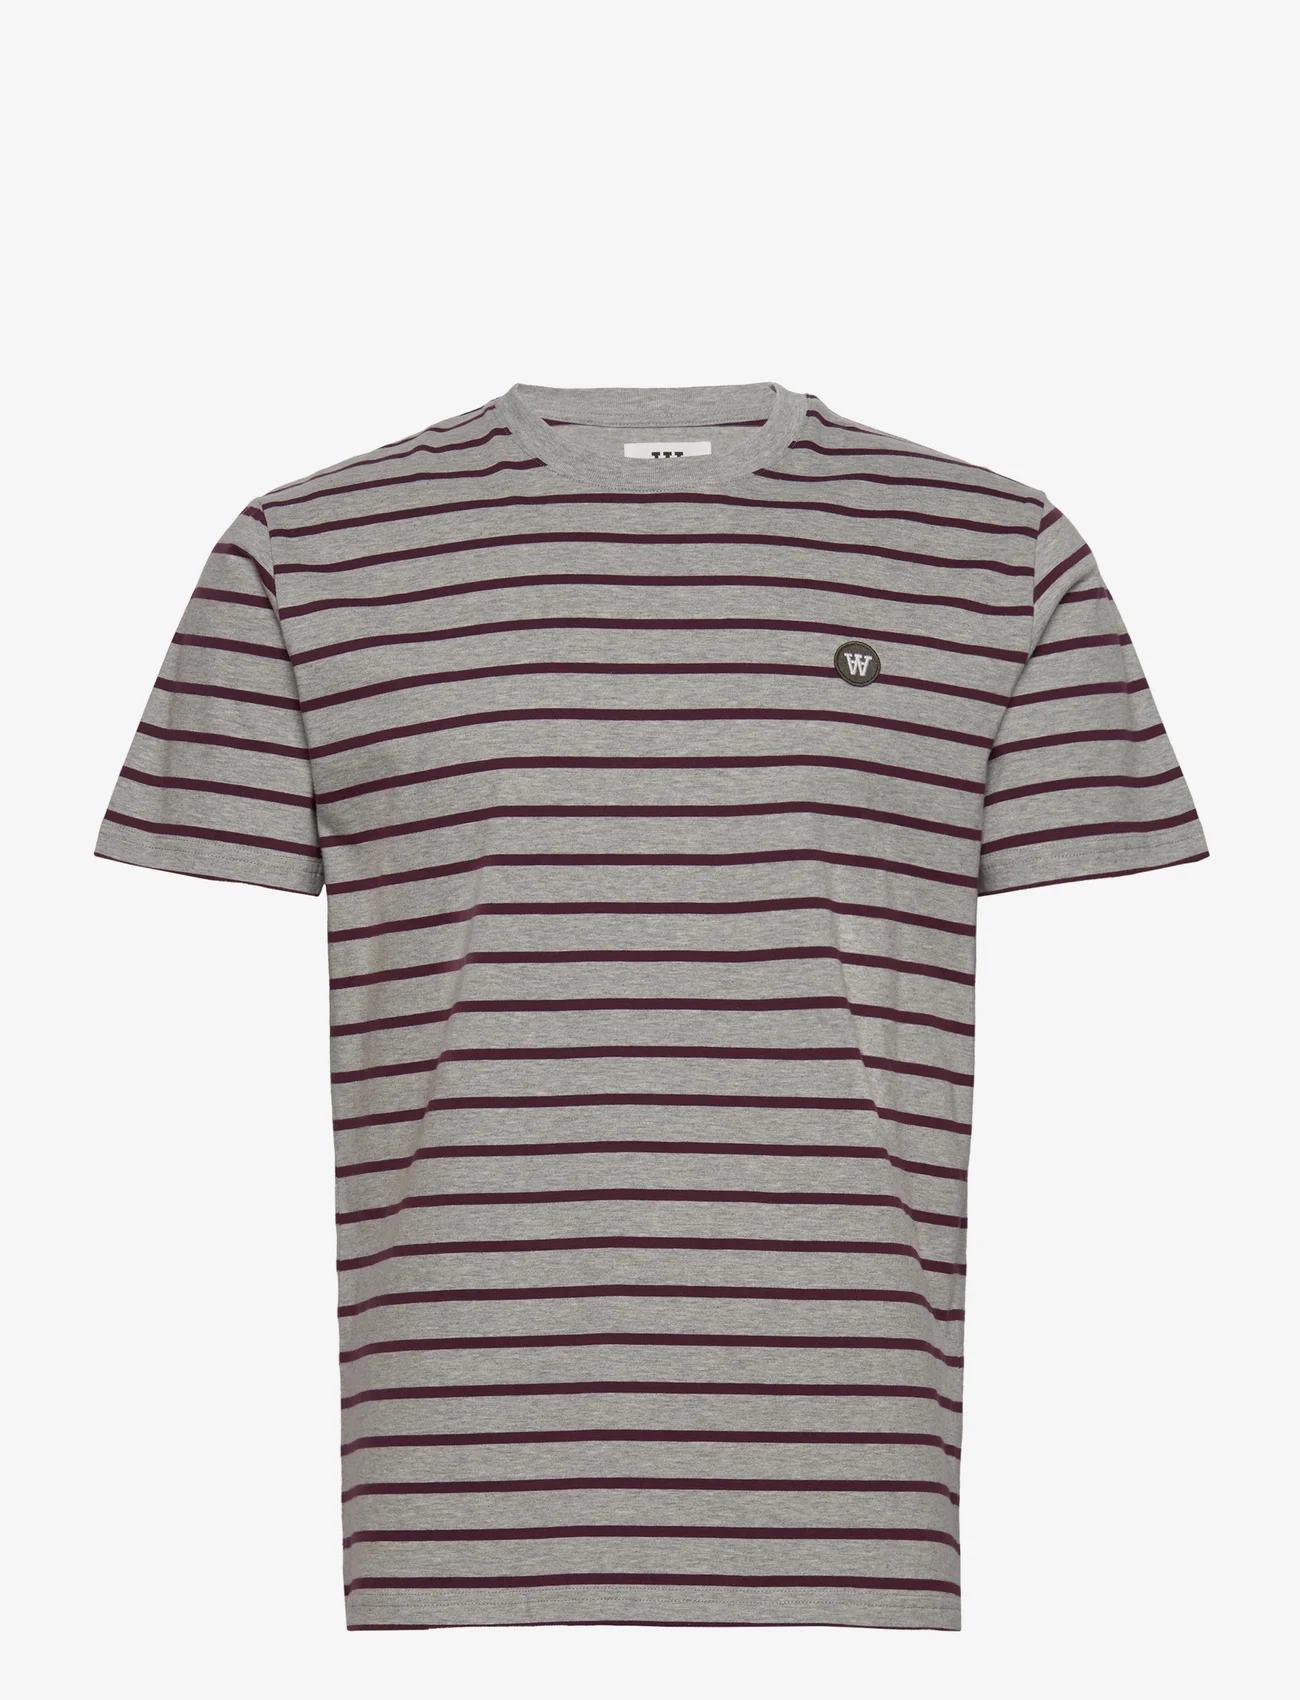 Double A by Wood Wood - Ace striped T-shirt GOTS - t-shirts - crystal grey / wine tasting stripe - 0